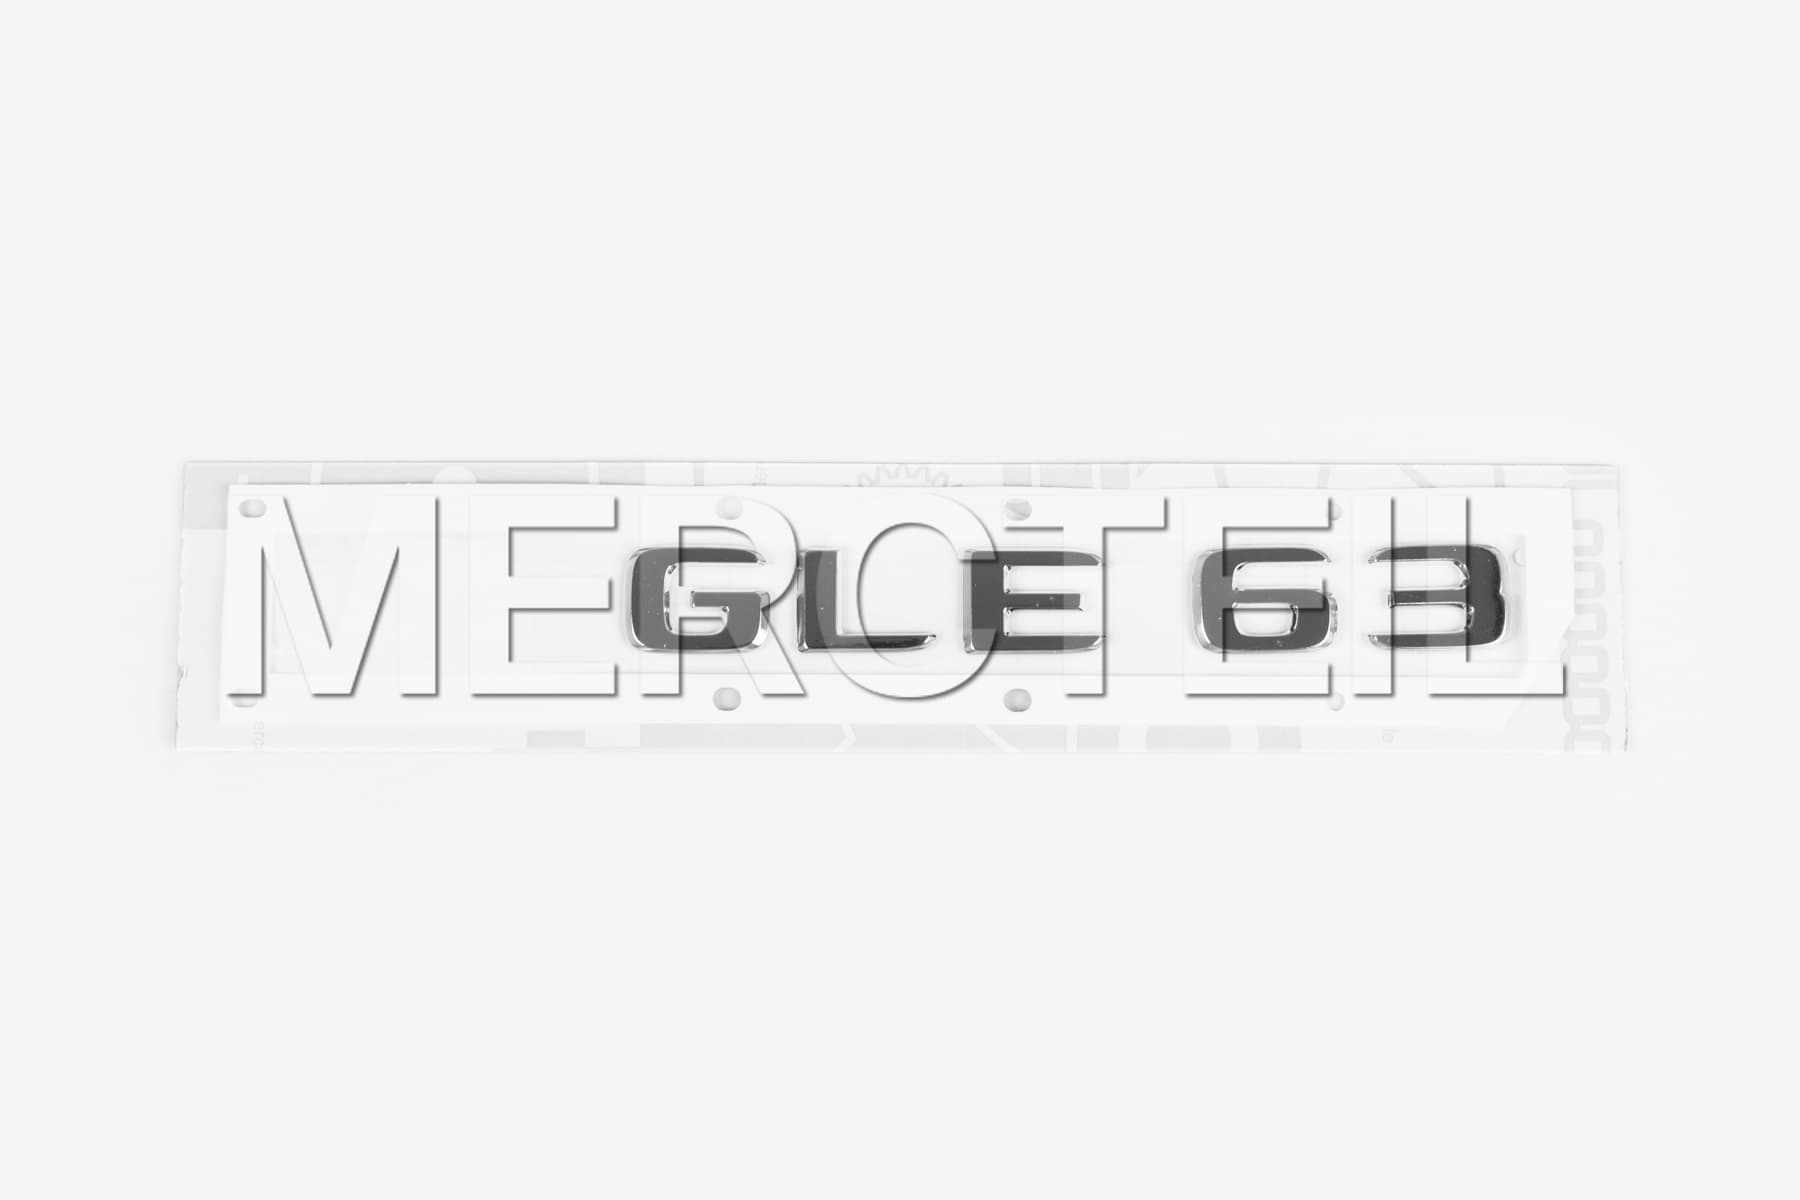 GLE-Class Coupe GLE63 AMG Model Logo Decal C167 Genuine Mercedes-AMG (part number: A1678175800)